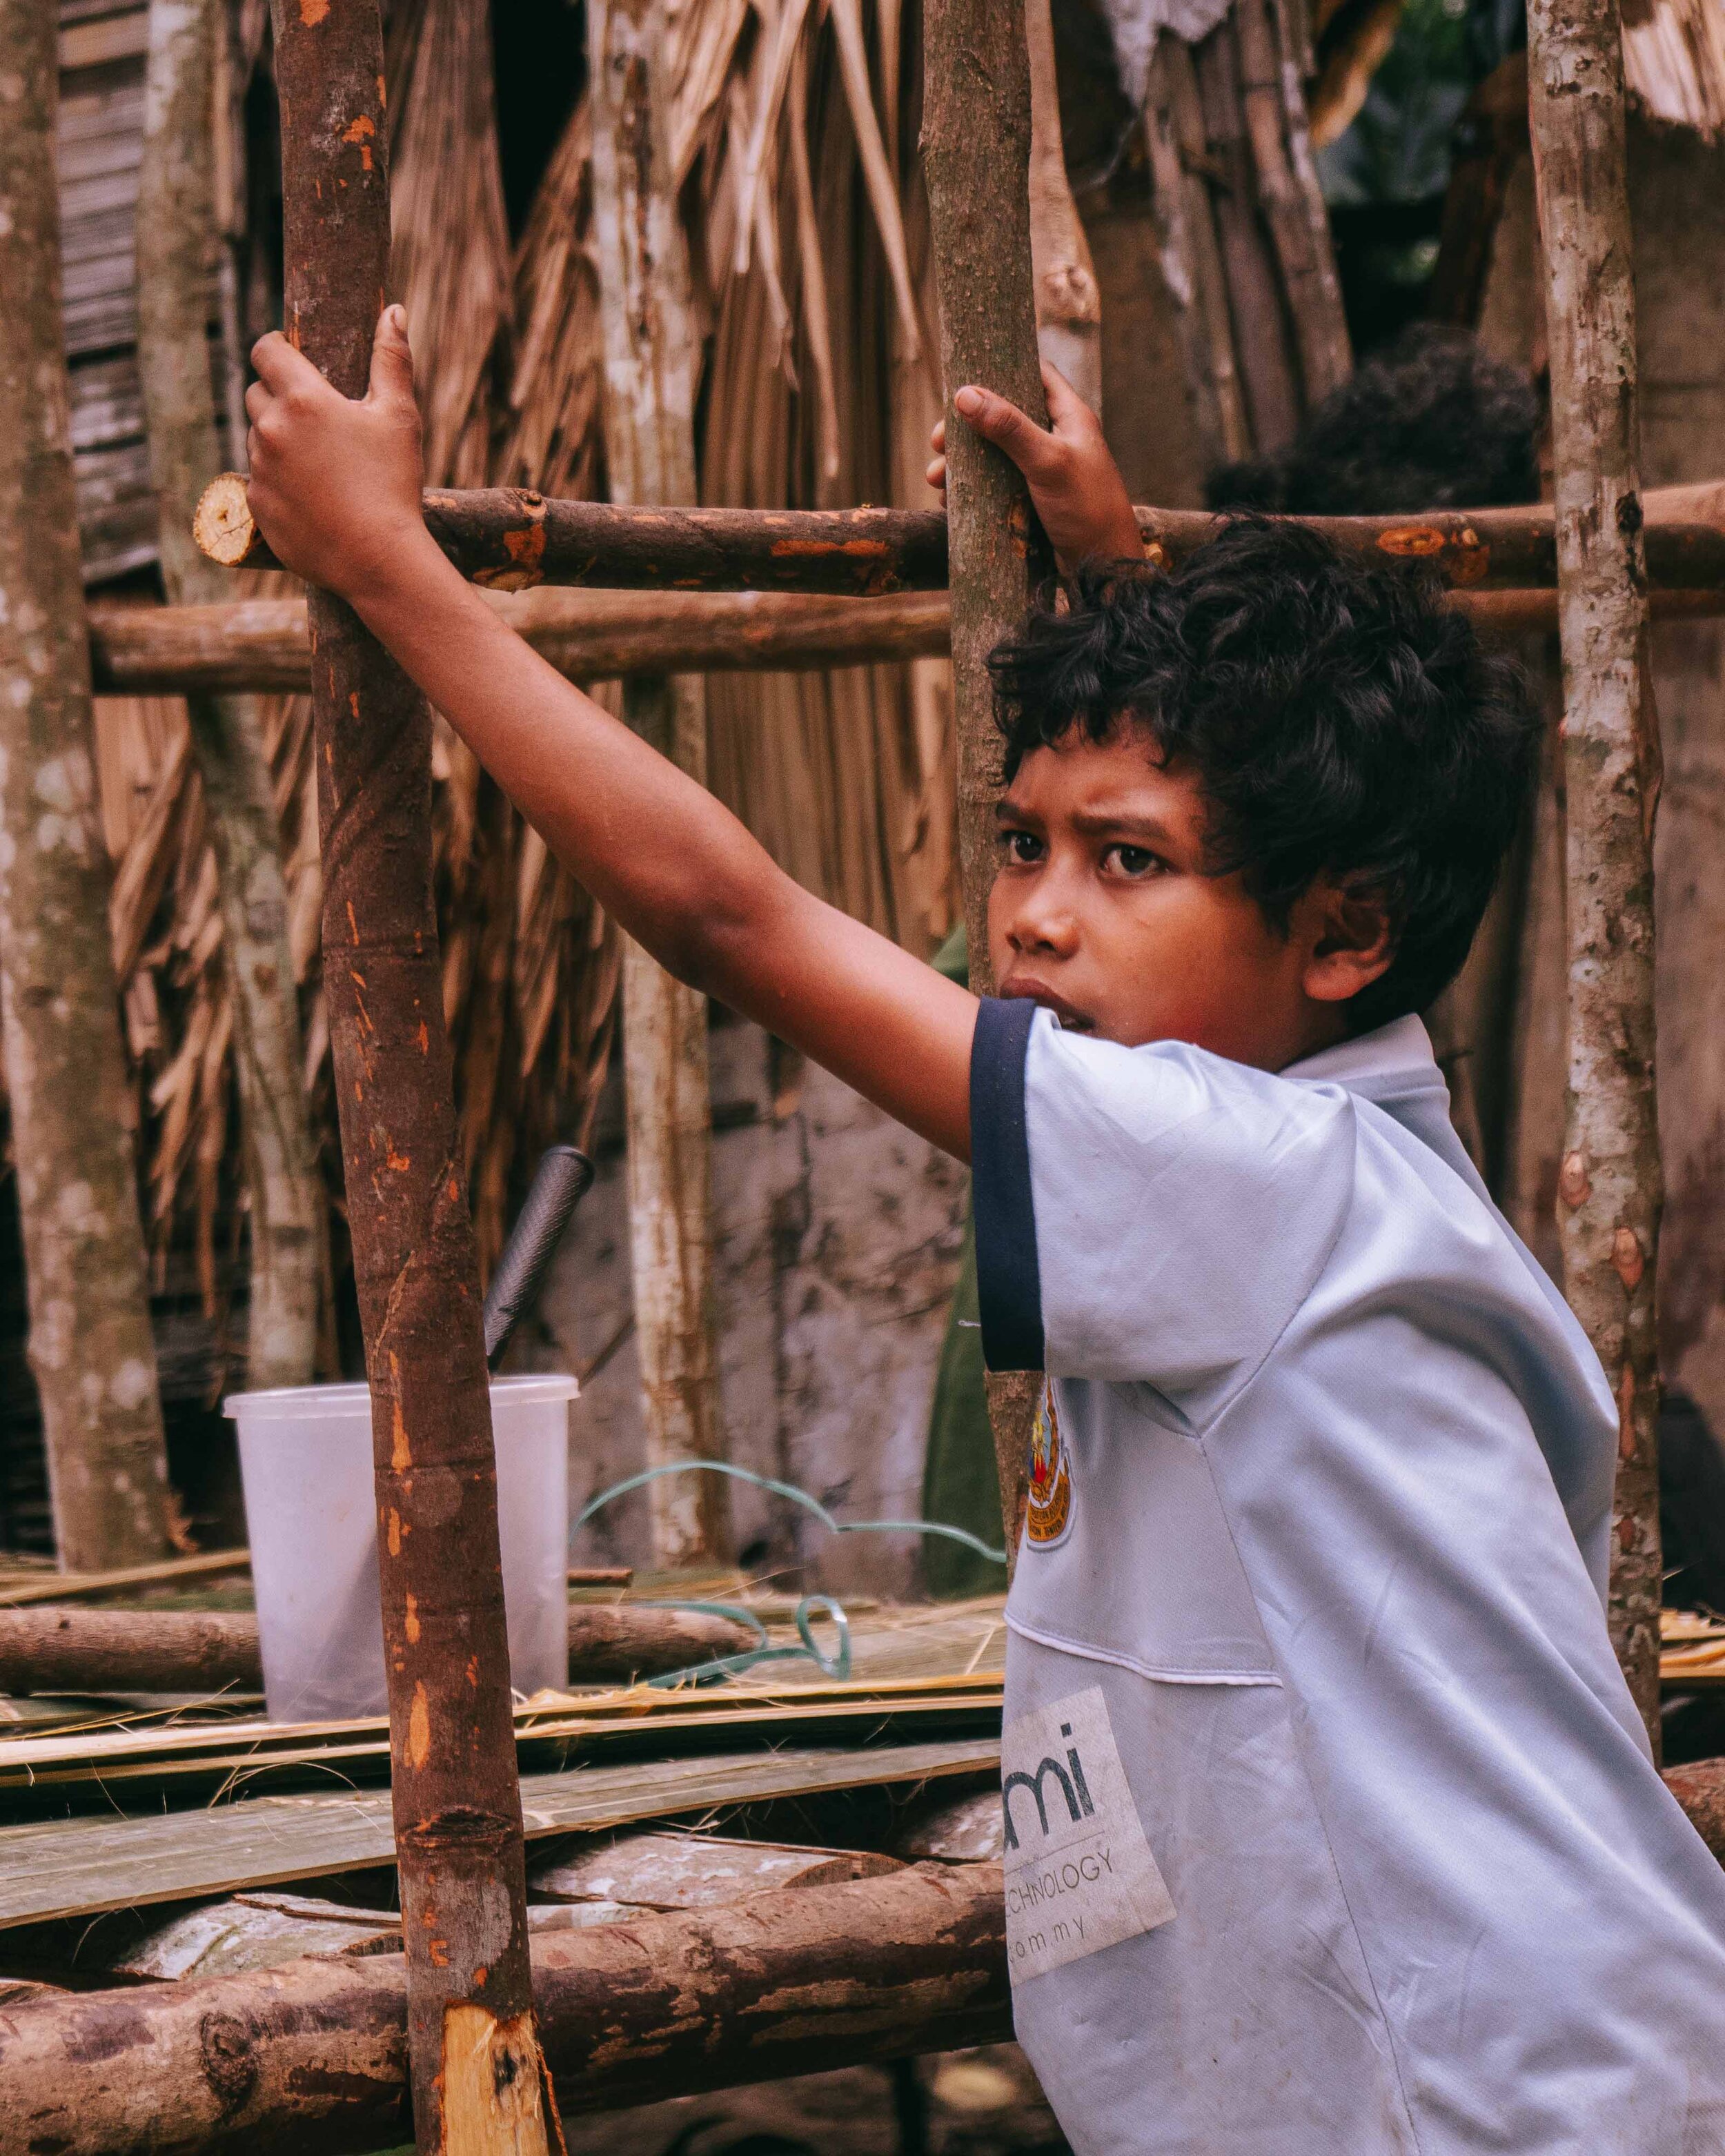  As the world modernises, so do the Orang Asli. The younger generations are required to go to school. They get educated, and often move to the cities afterwards.  I wondered if their way of life, practices, and history will carry on. Or, will it be a